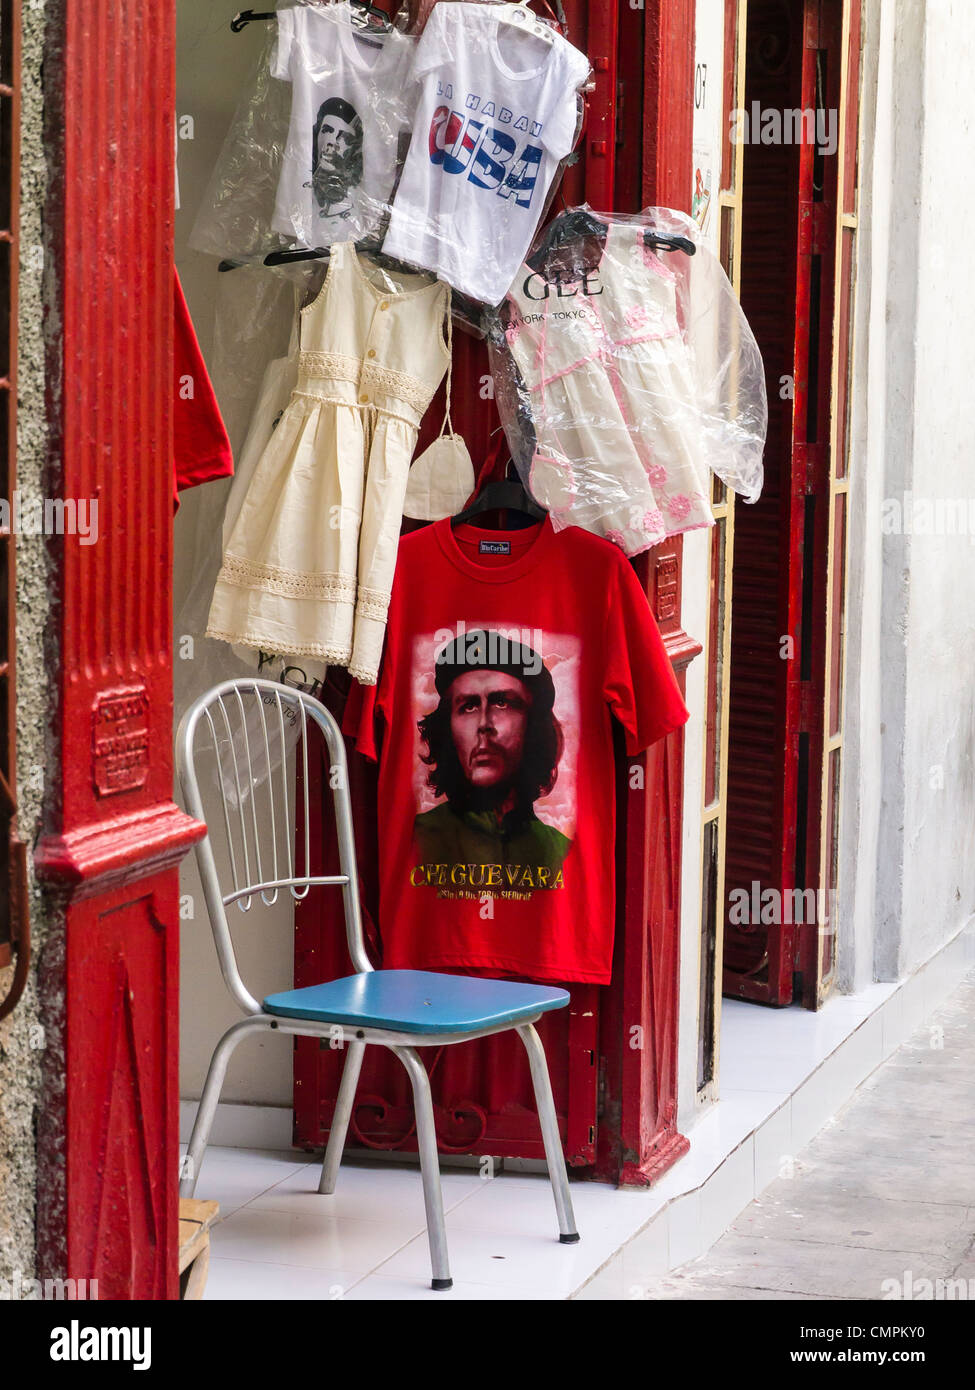 A store front catering to tourists in the Havana Vieja section of Havana, Cuba displaying Che Guevara shirts. Stock Photo